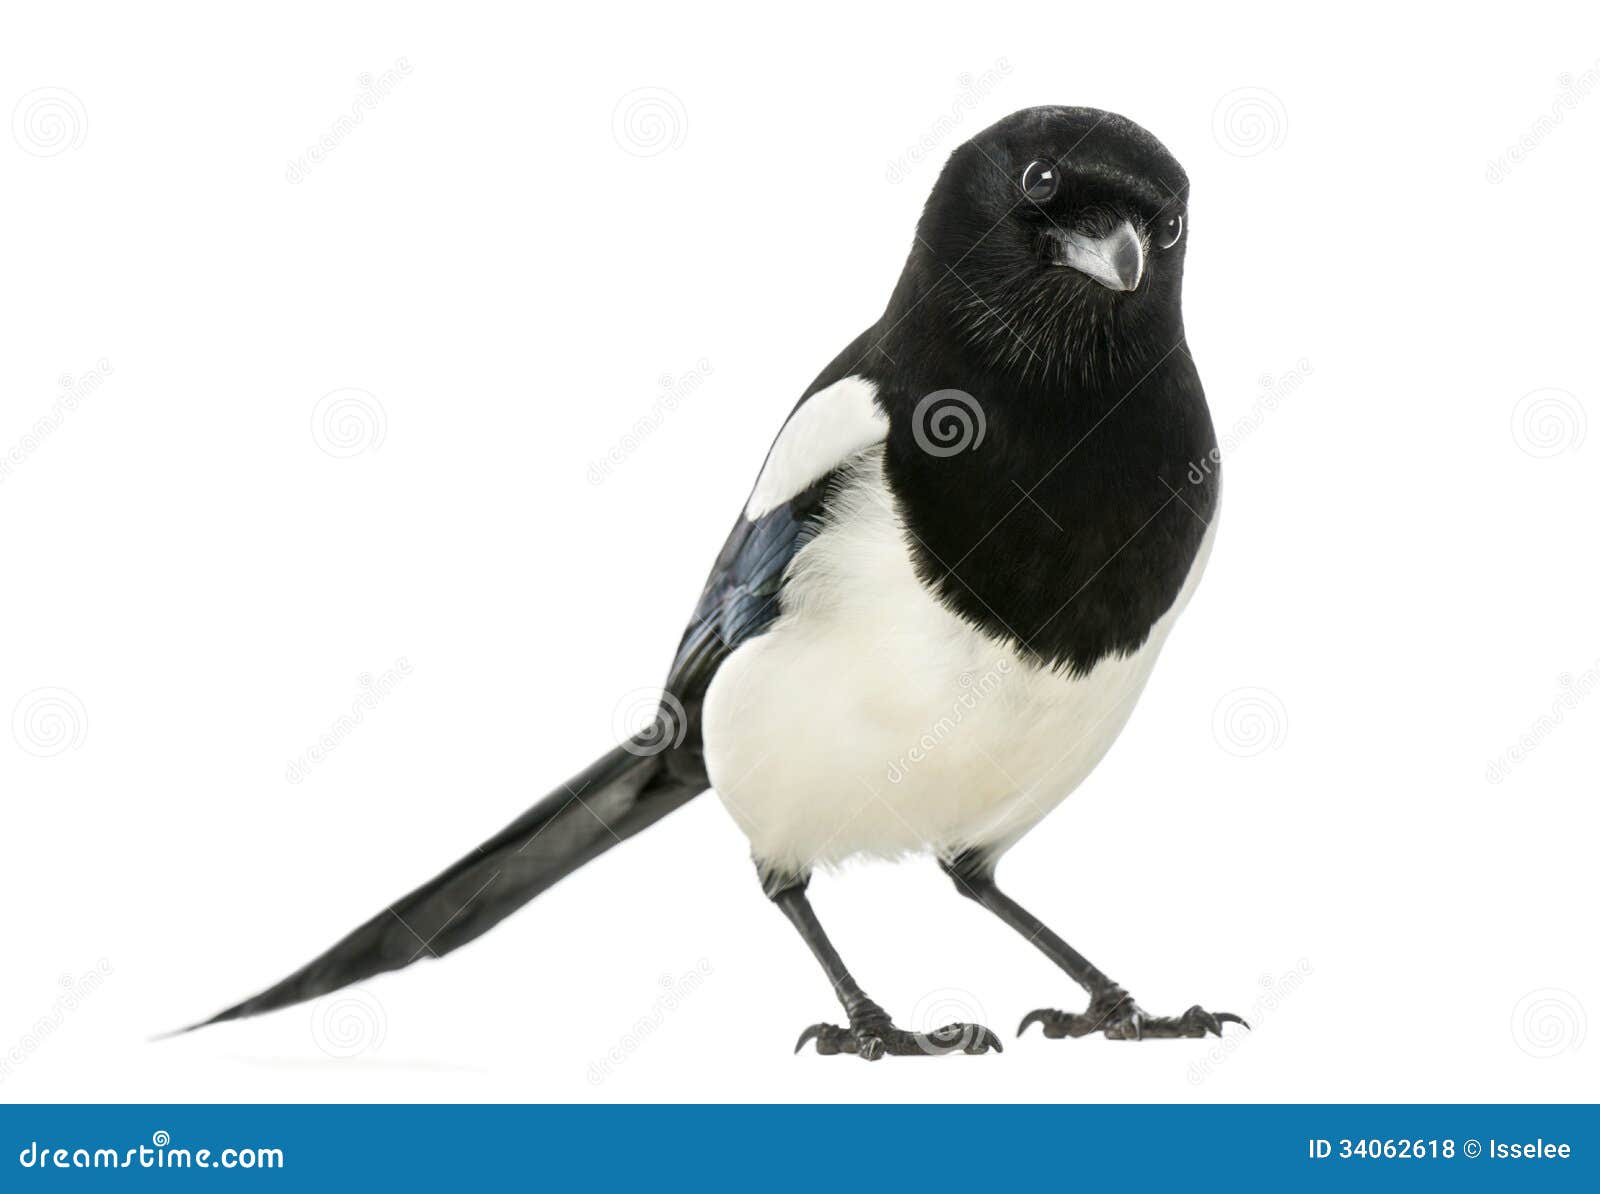 common magpie looking at the camera, pica pica, 